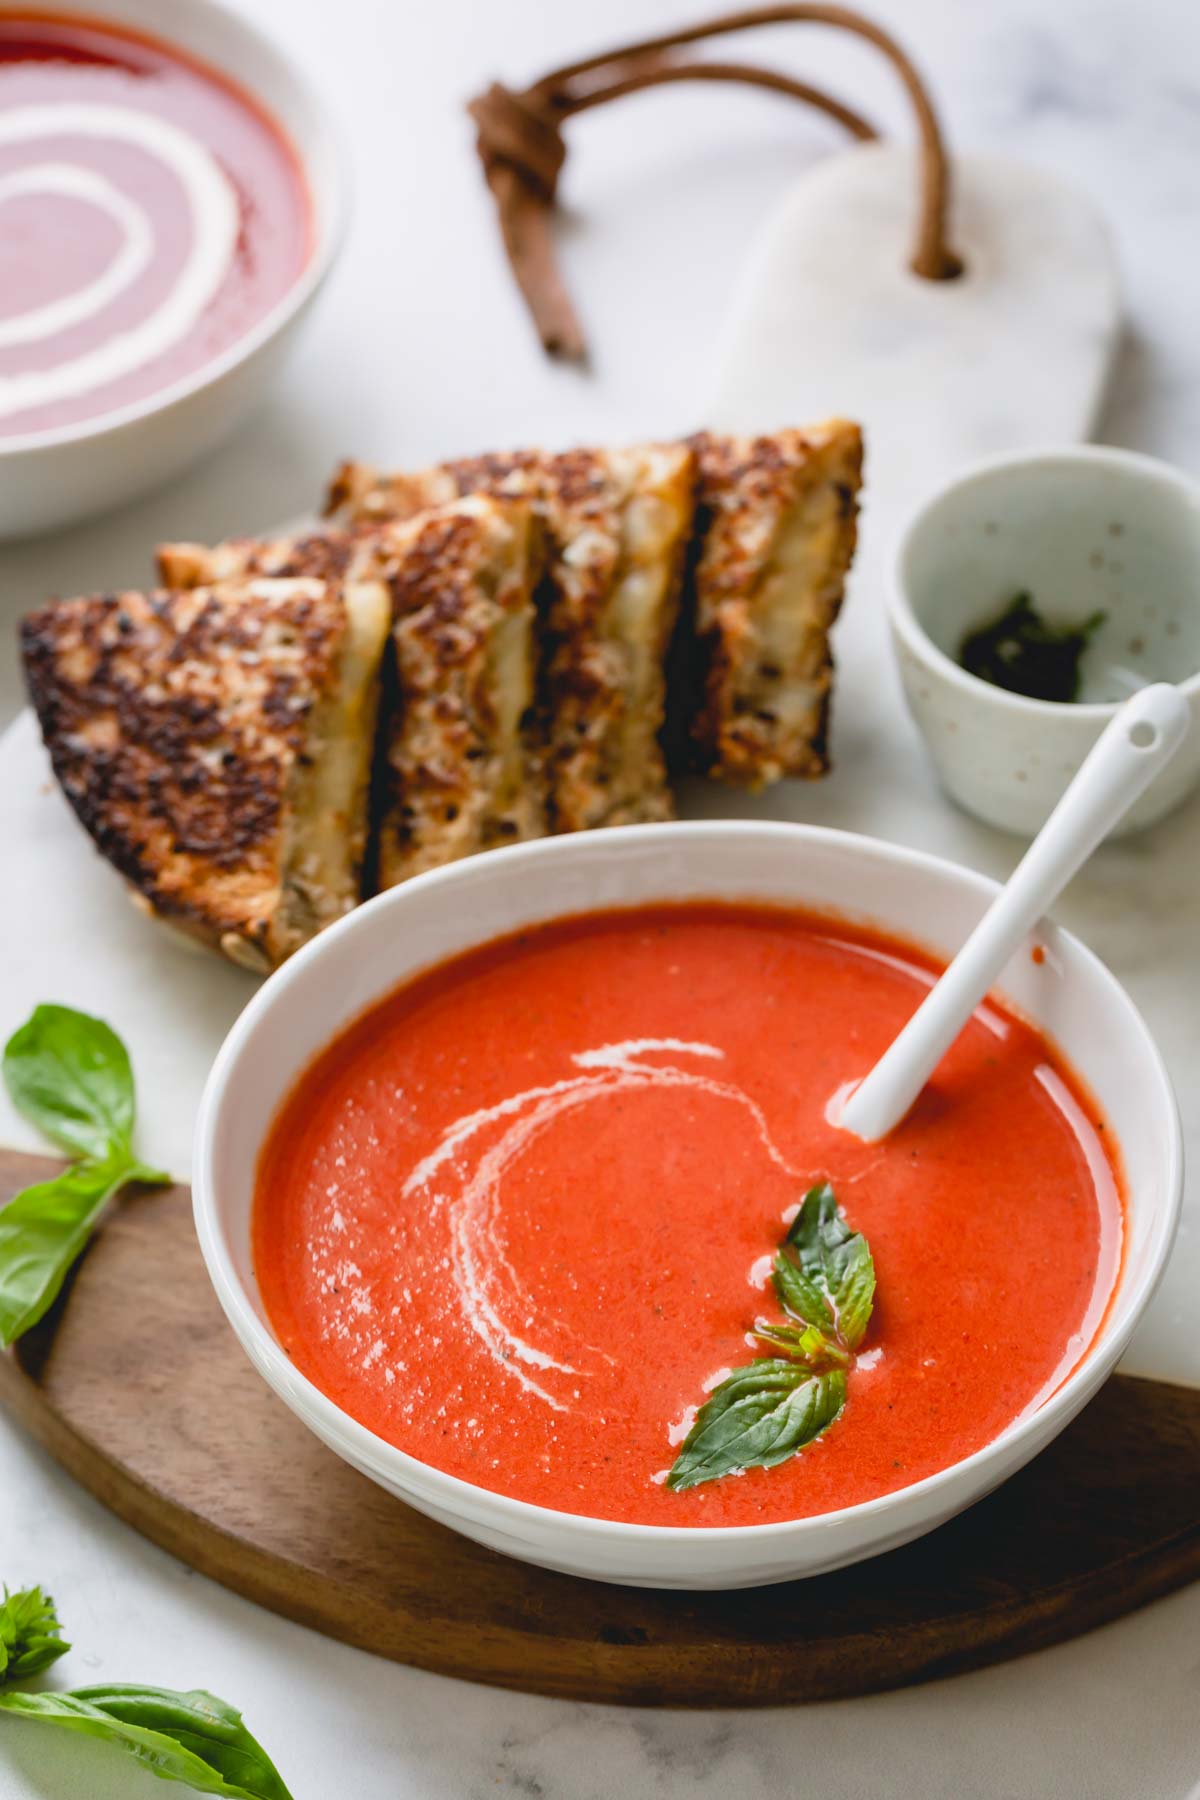 A bowl of smooth roasted red bell pepper soup garnished with cream and basil leaves and side of grilled cheese.